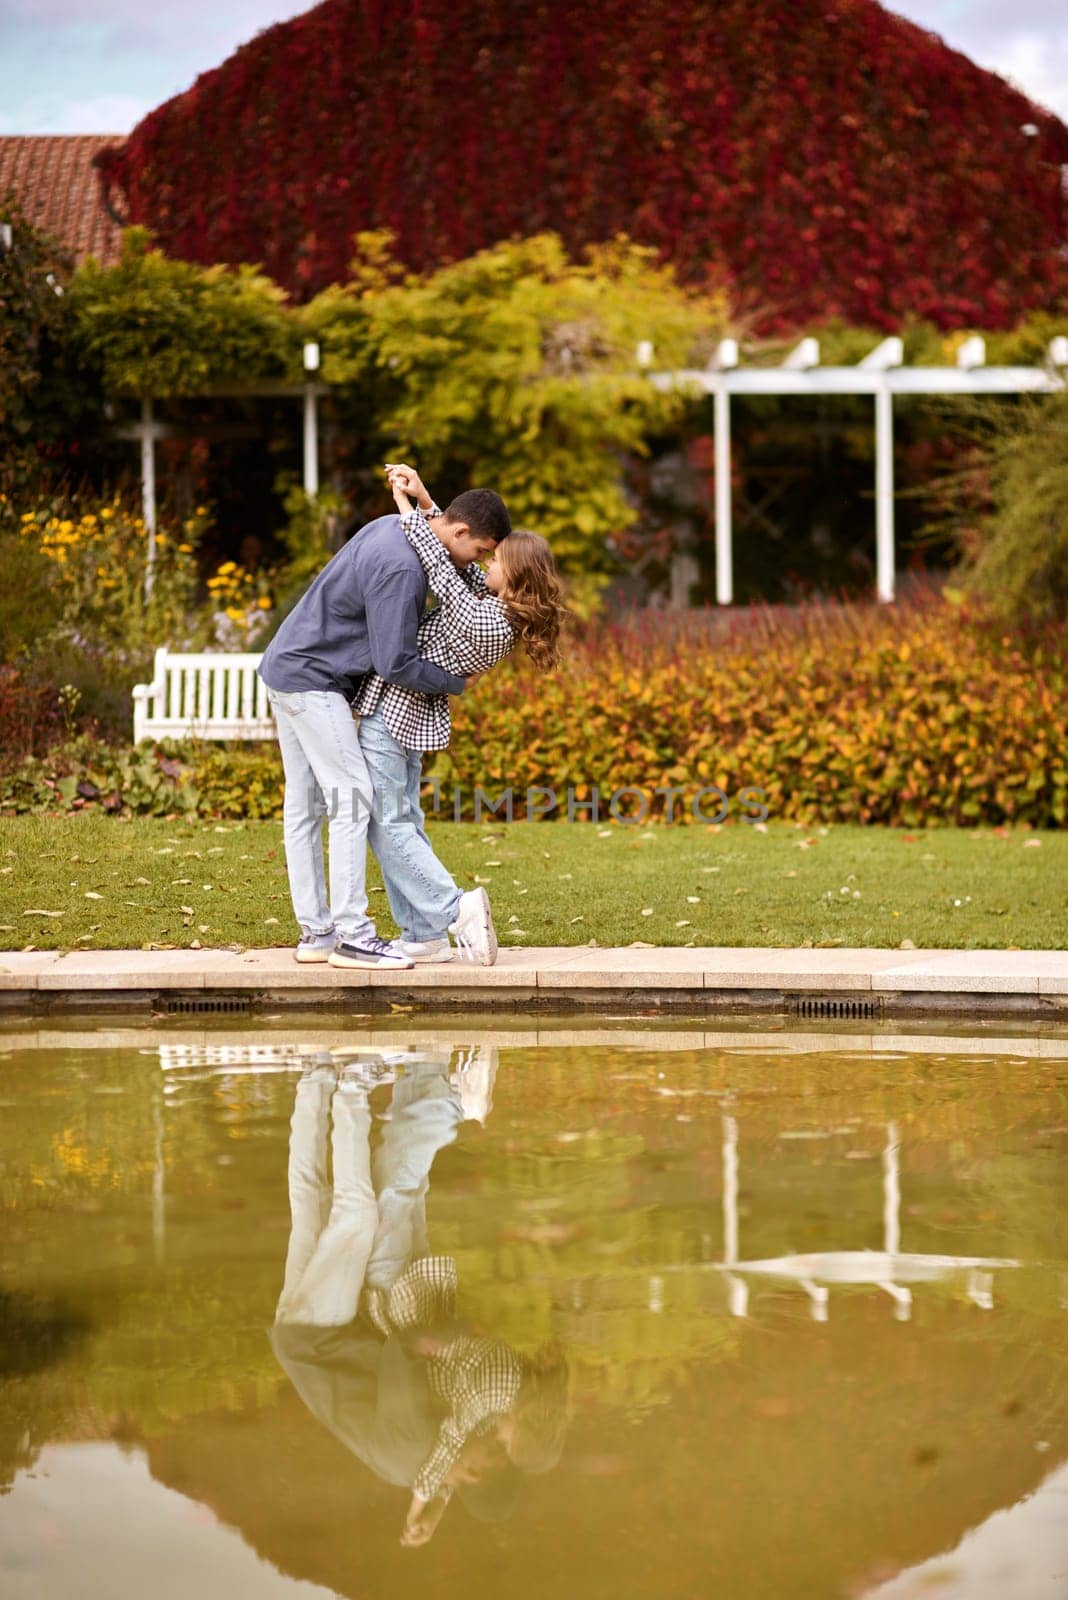 A couple in love hugs on the shore of a city pond in the European town. love story against the backdrop of autumn nature. romantic ambiance, couple goals, outdoor romance, seasonal charm, love in the city, autumnal vibes, European town, city pond, affectionate bonding, love story